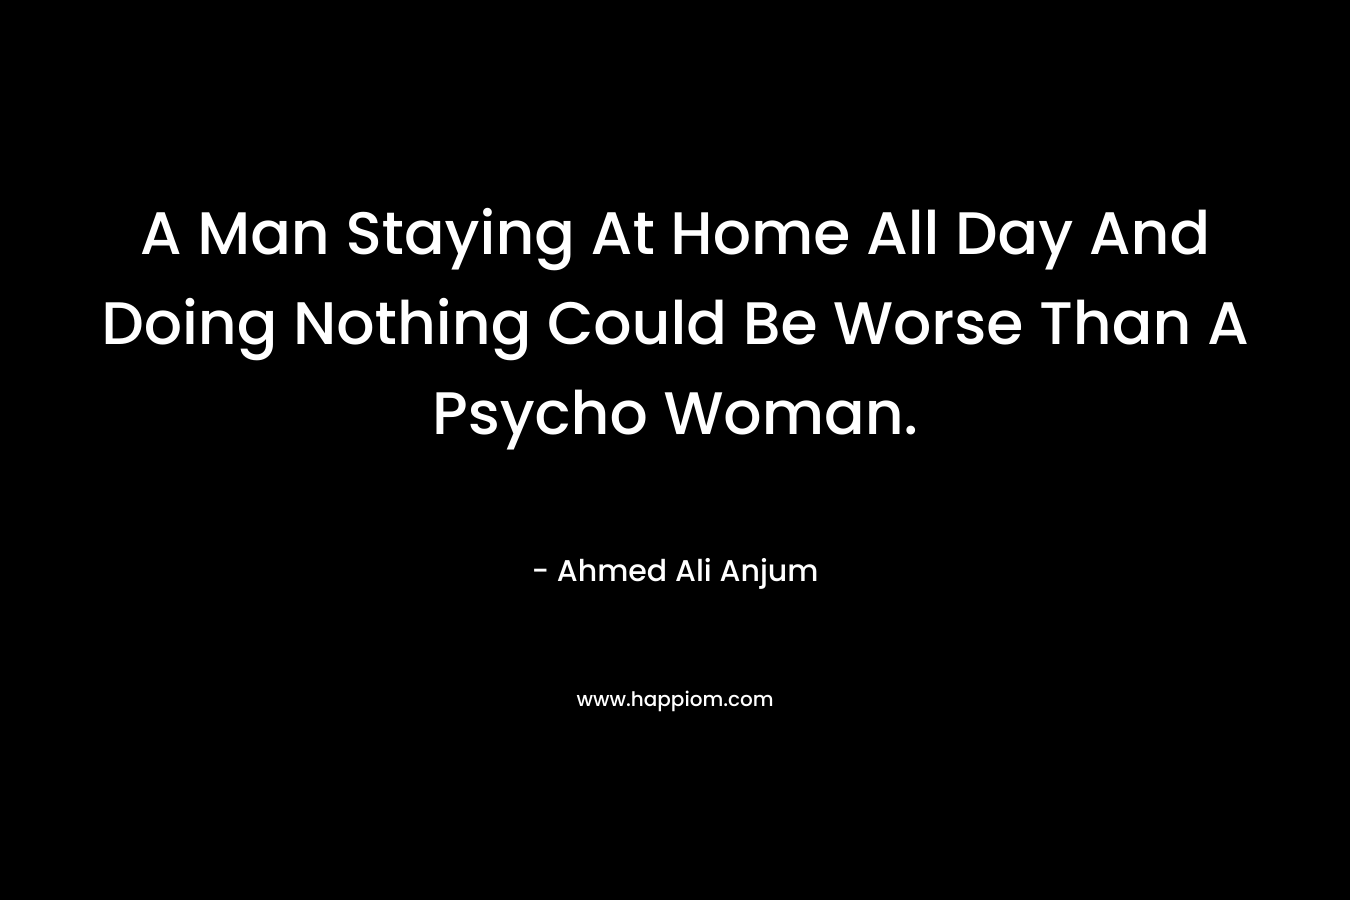 A Man Staying At Home All Day And Doing Nothing Could Be Worse Than A Psycho Woman. – Ahmed Ali Anjum